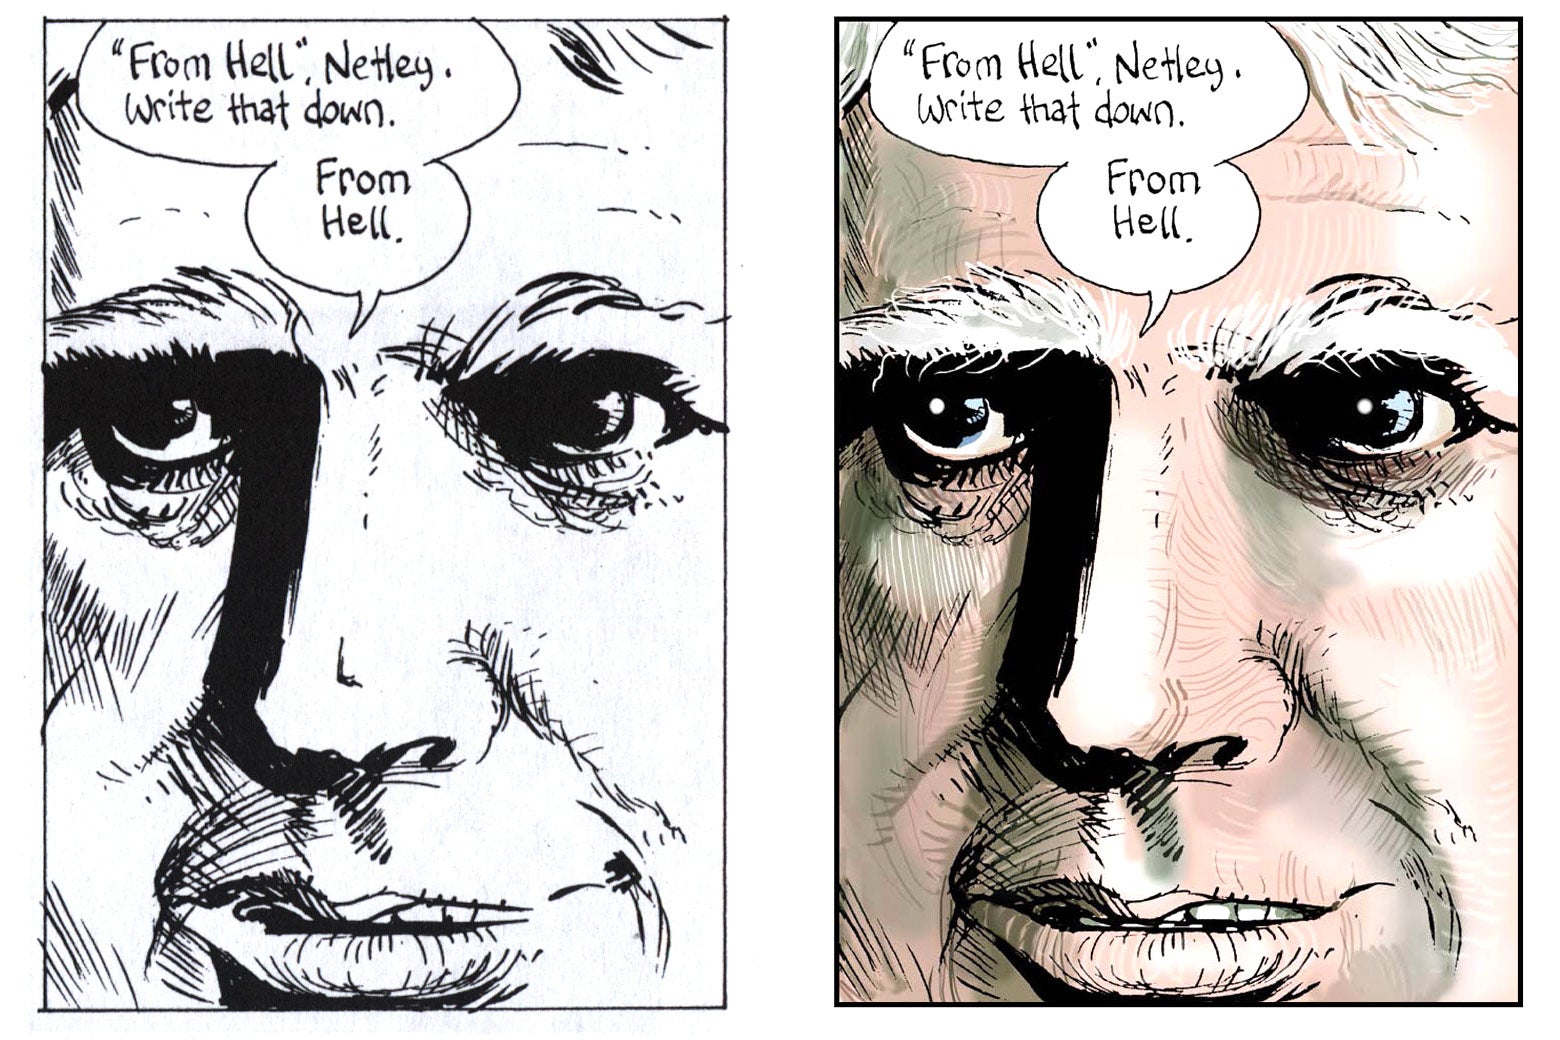 Side by side images: black and white and colorized "From Hell, Netley" panels.